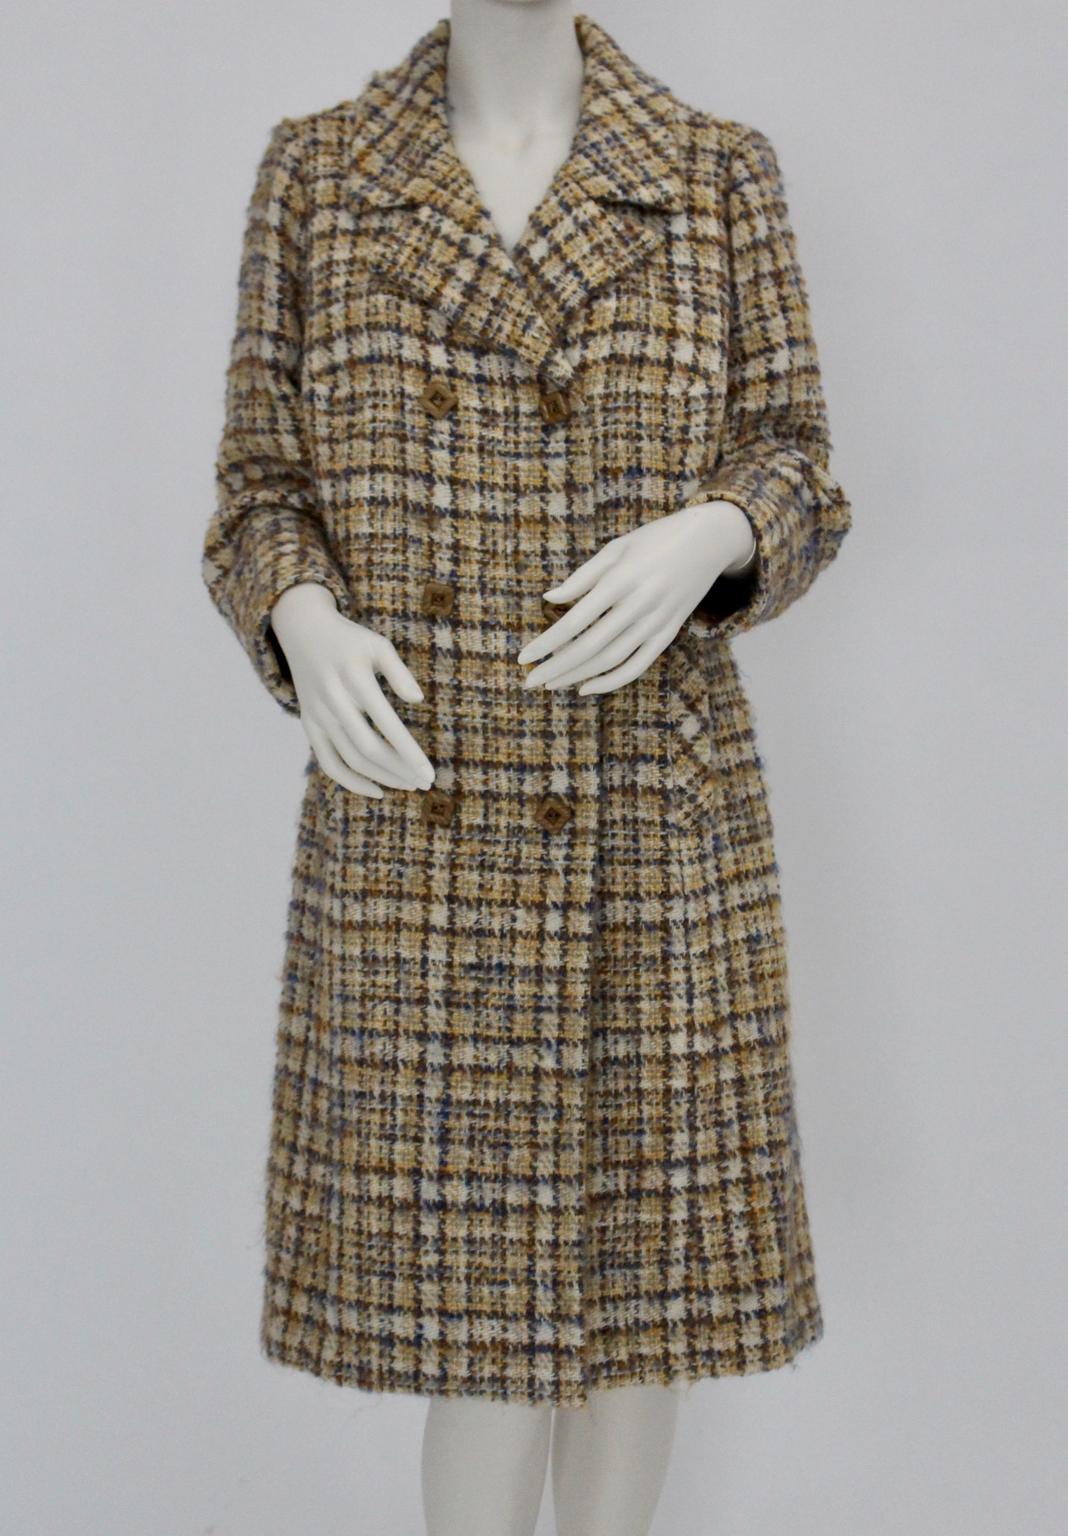 This coat by Herbert Schill was made of tweed boucle fabric in the charming colors wool white, blue and cappuccino.
The coat features a double- breasted button closure with cappuccino colored square buttons and two side pockets.
The tweed fabric